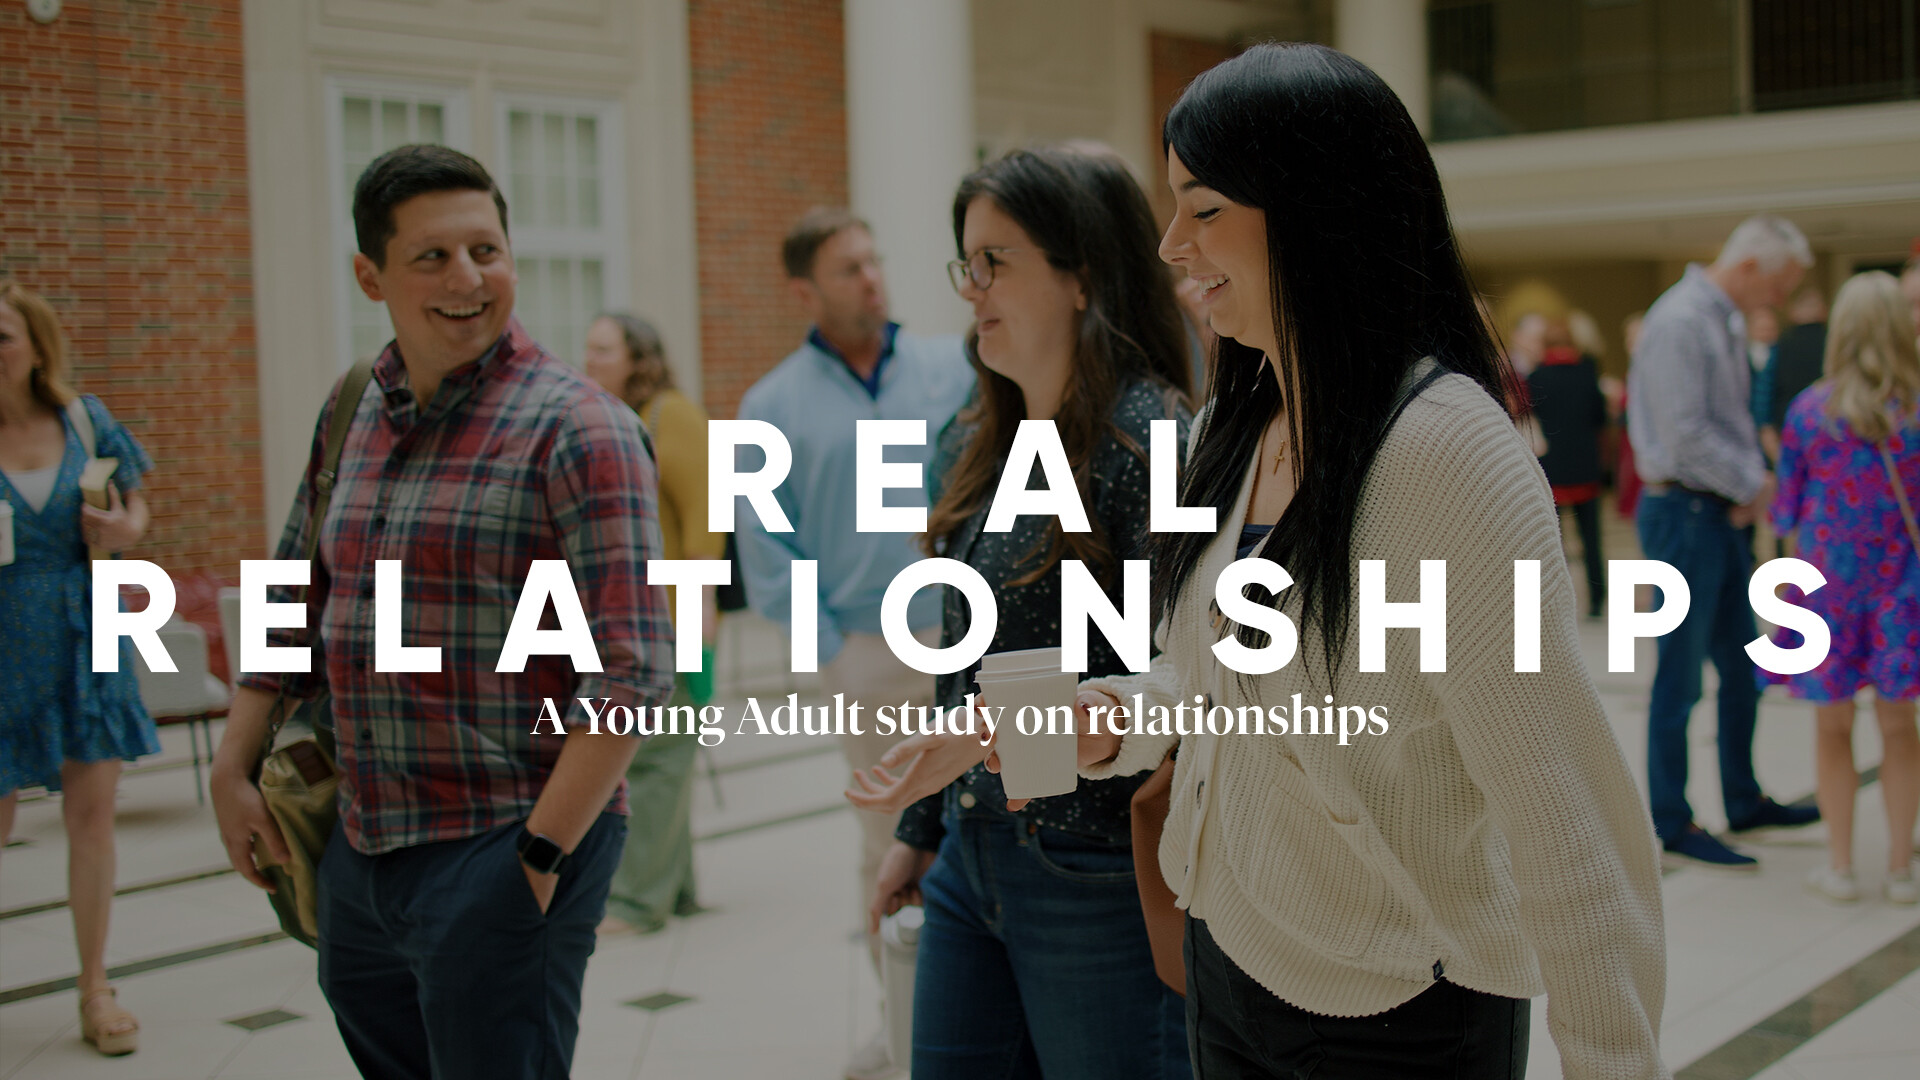 Real Relationships: A Young Adult study on relationships